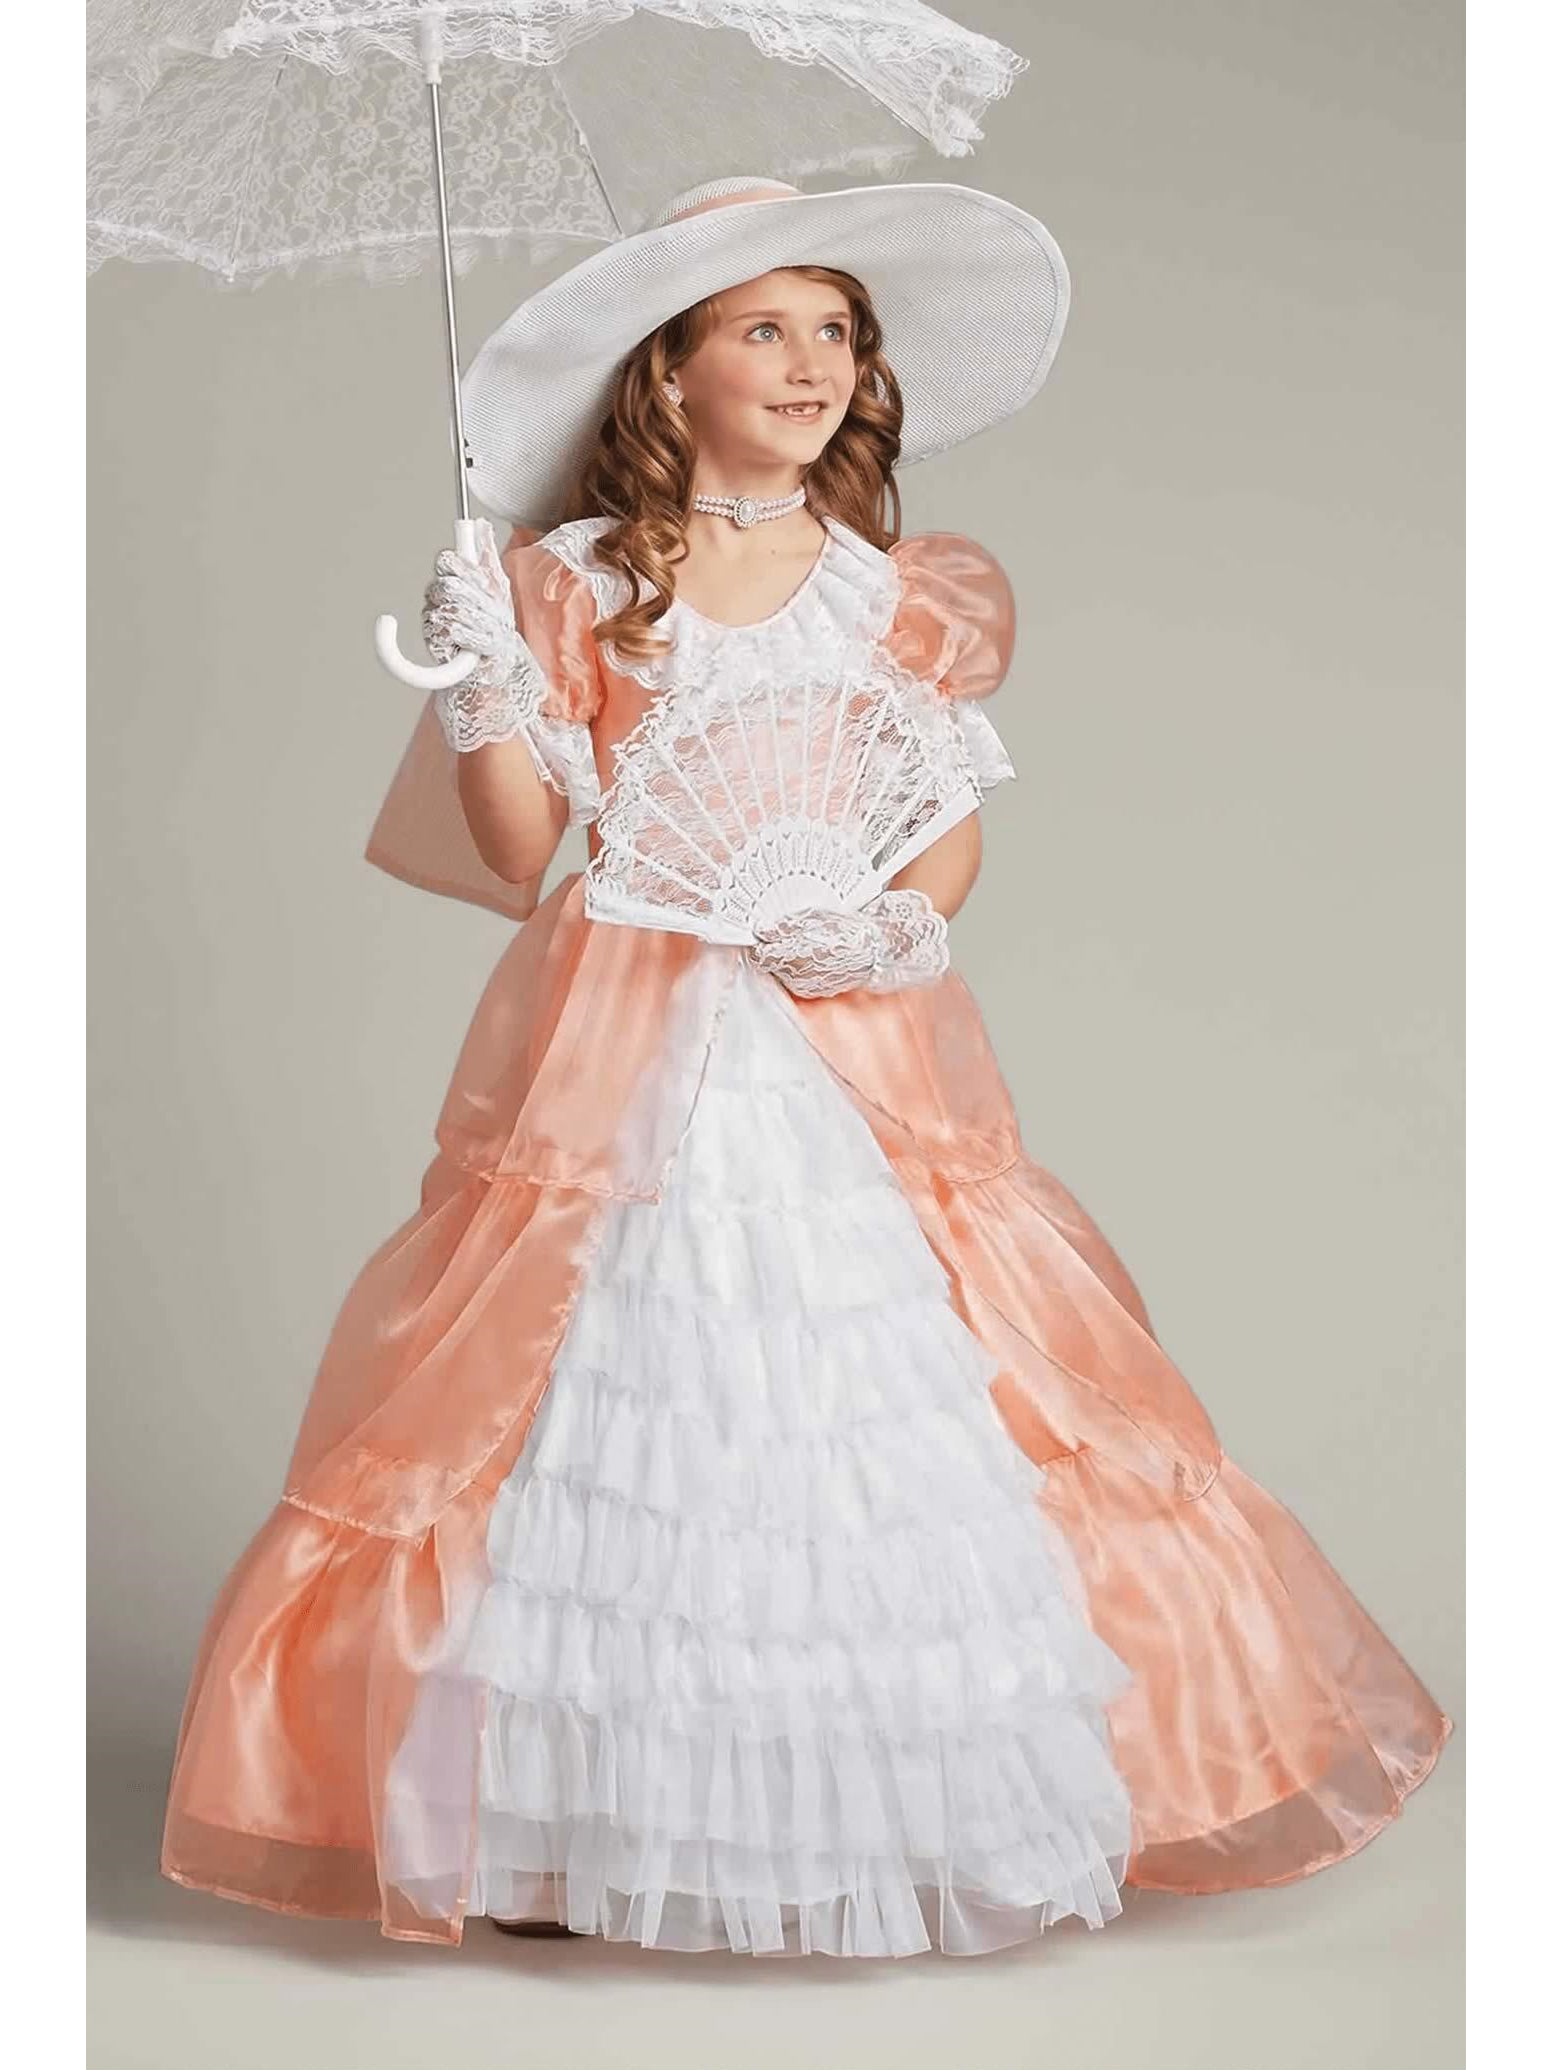 Peachy Southern Belle Costume for Girls